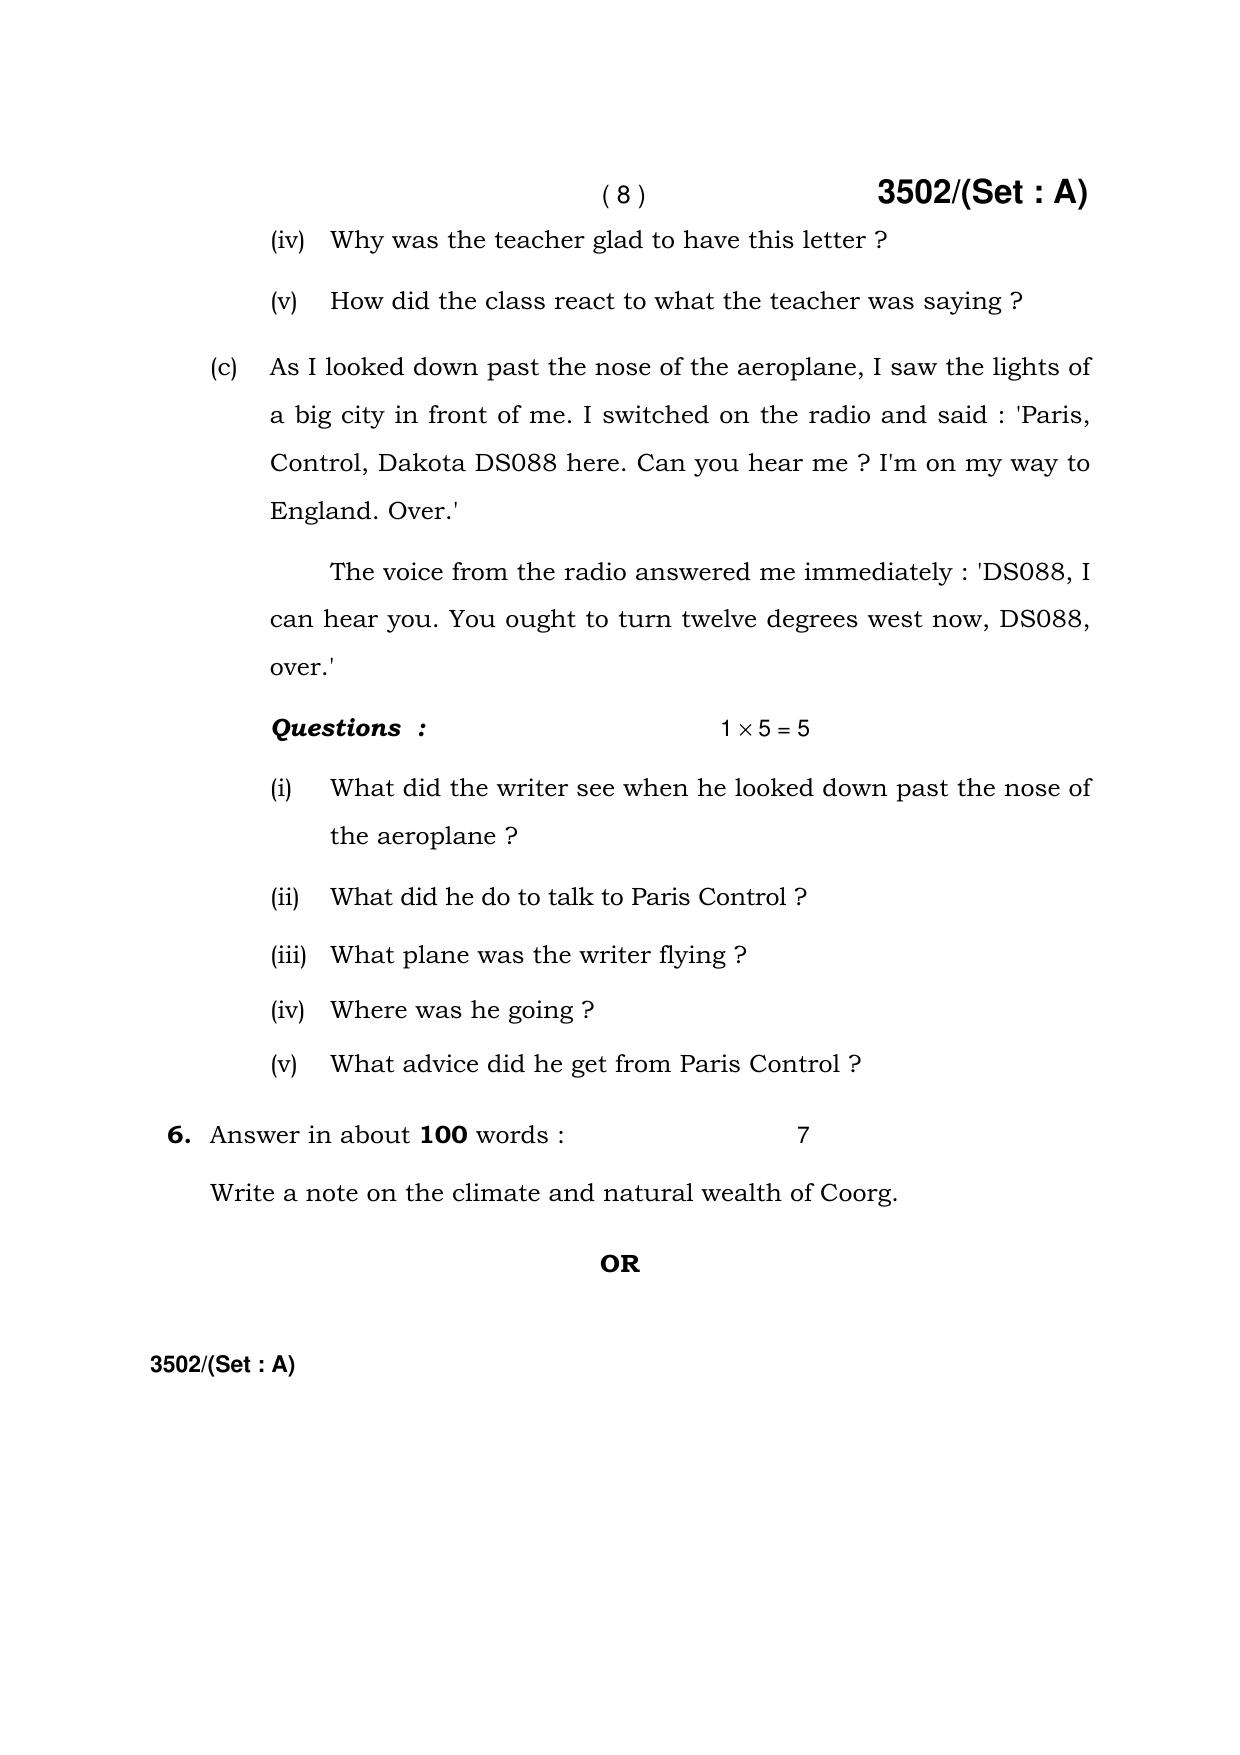 Haryana Board HBSE Class 10 English -A 2018 Question Paper - Page 8